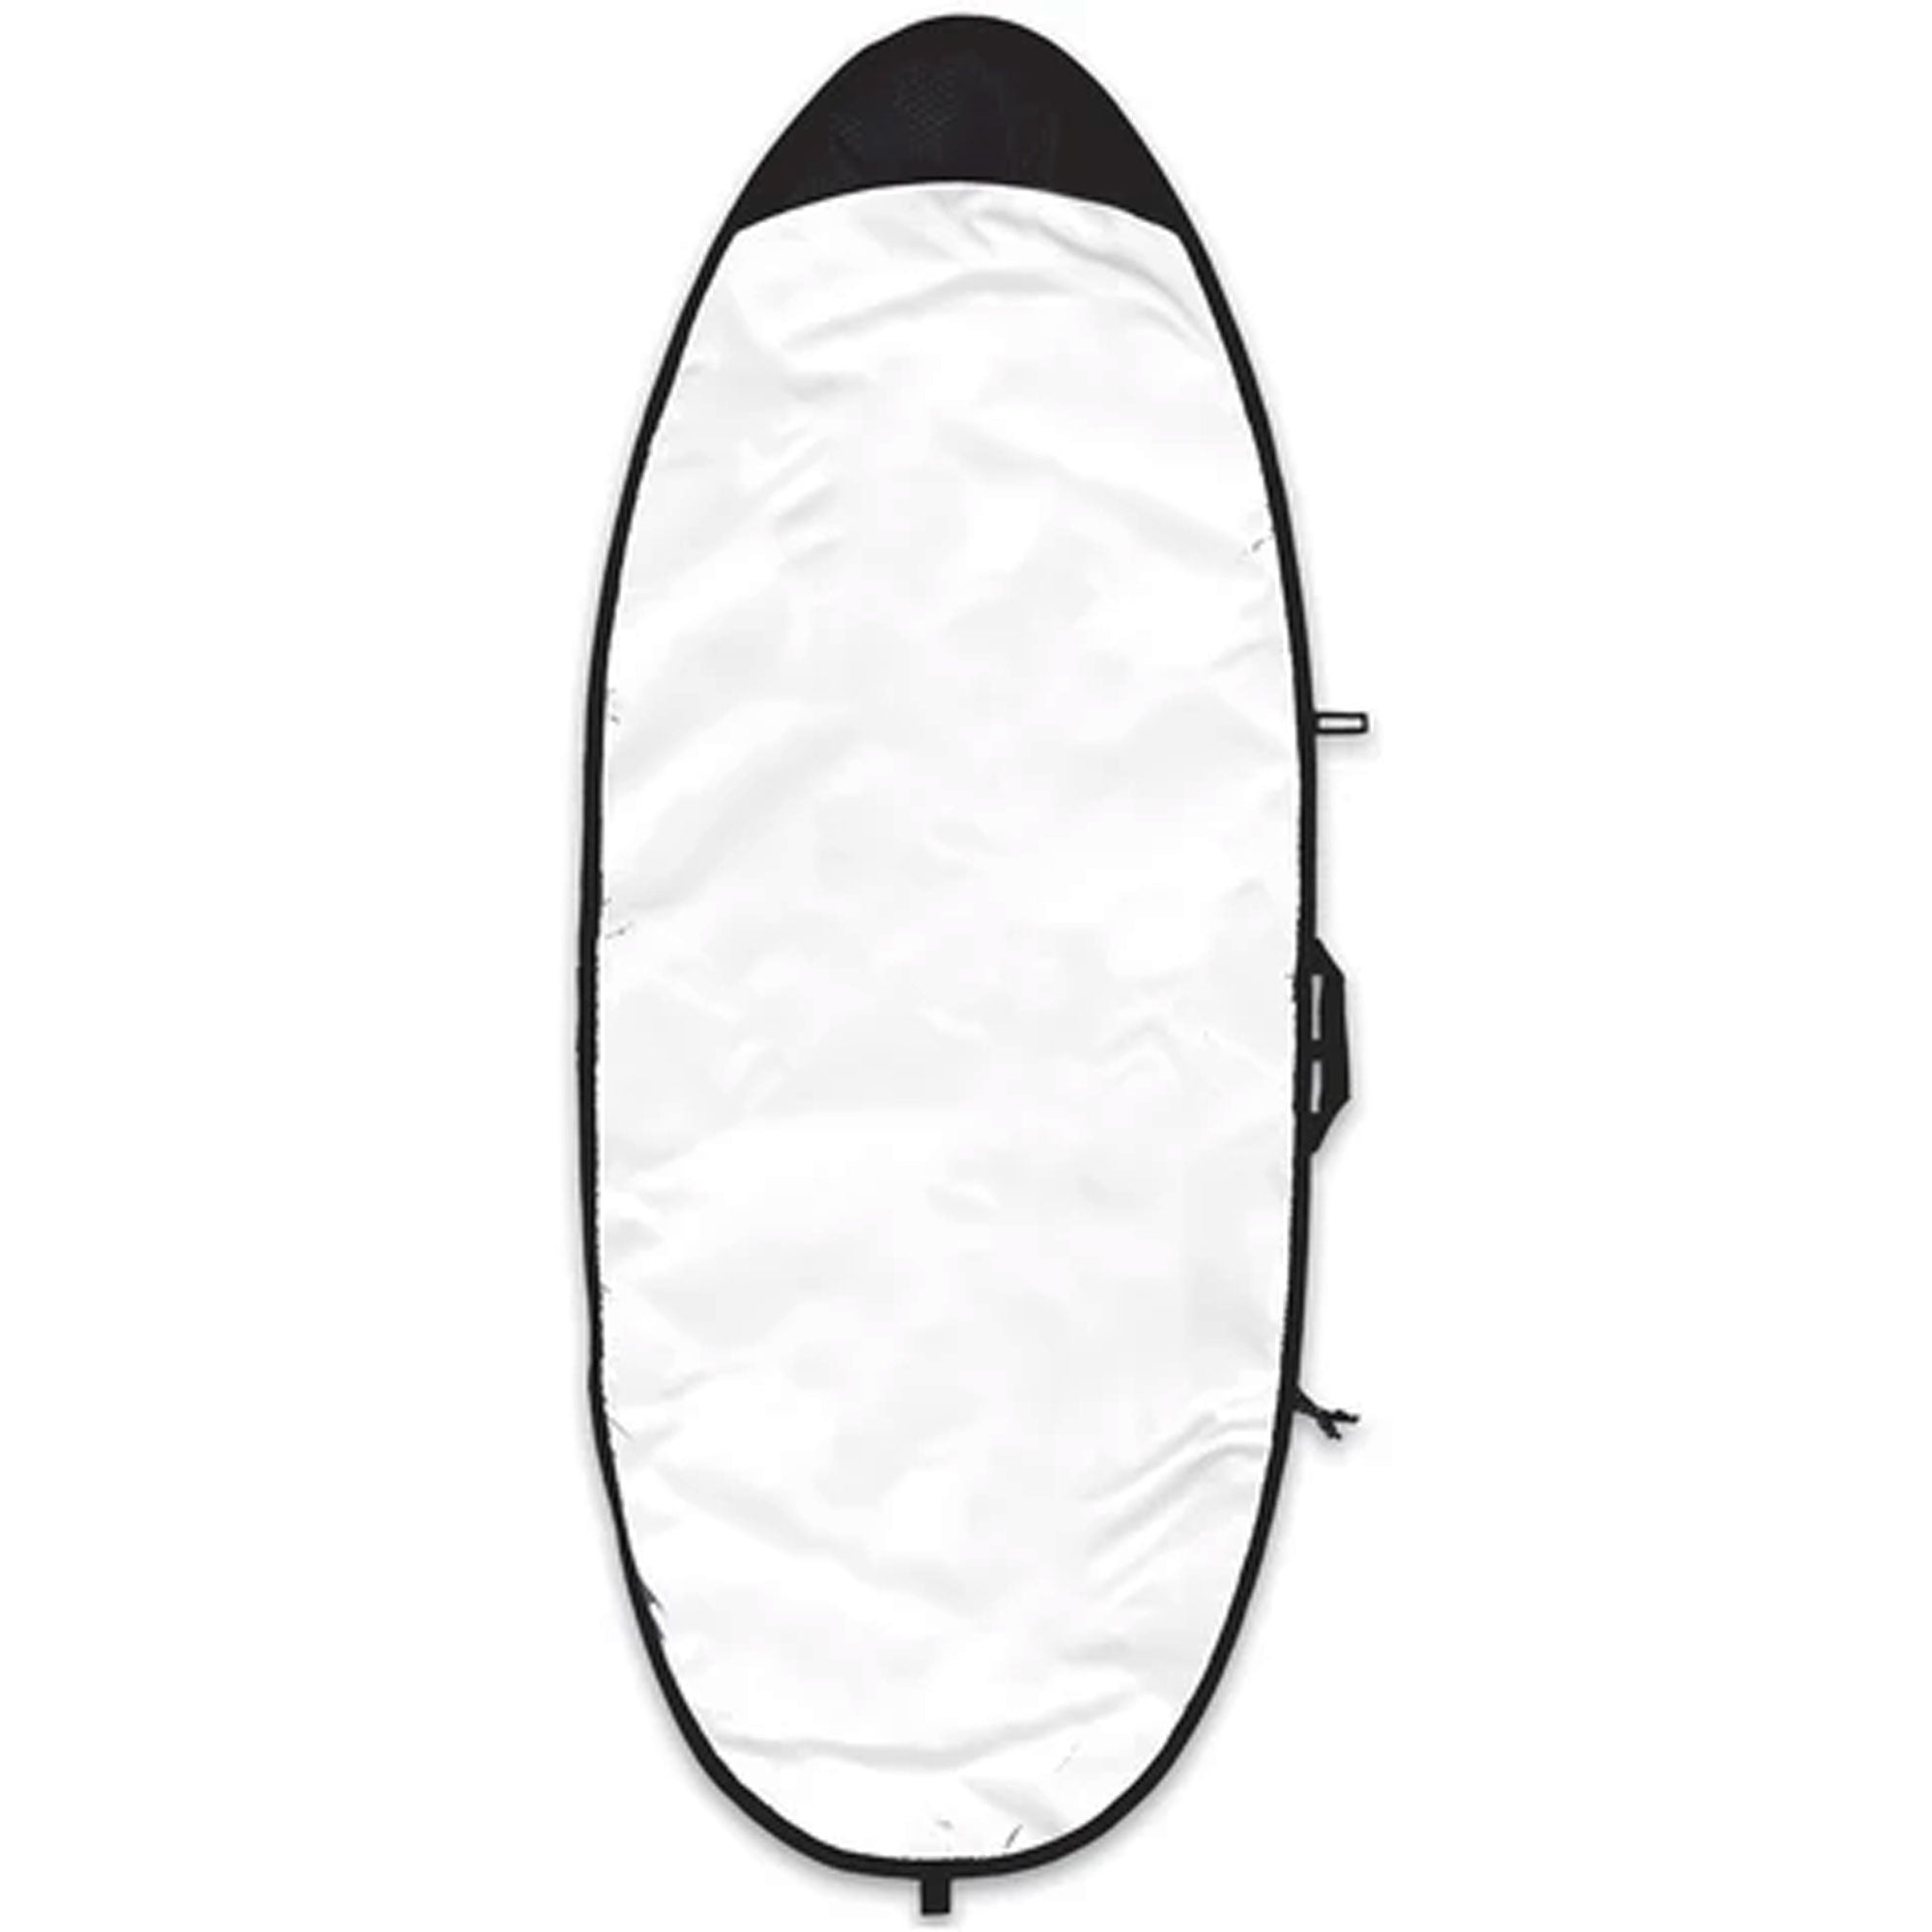 Channel Islands Fish Surfboard - The Surf Station - Surf Station Store